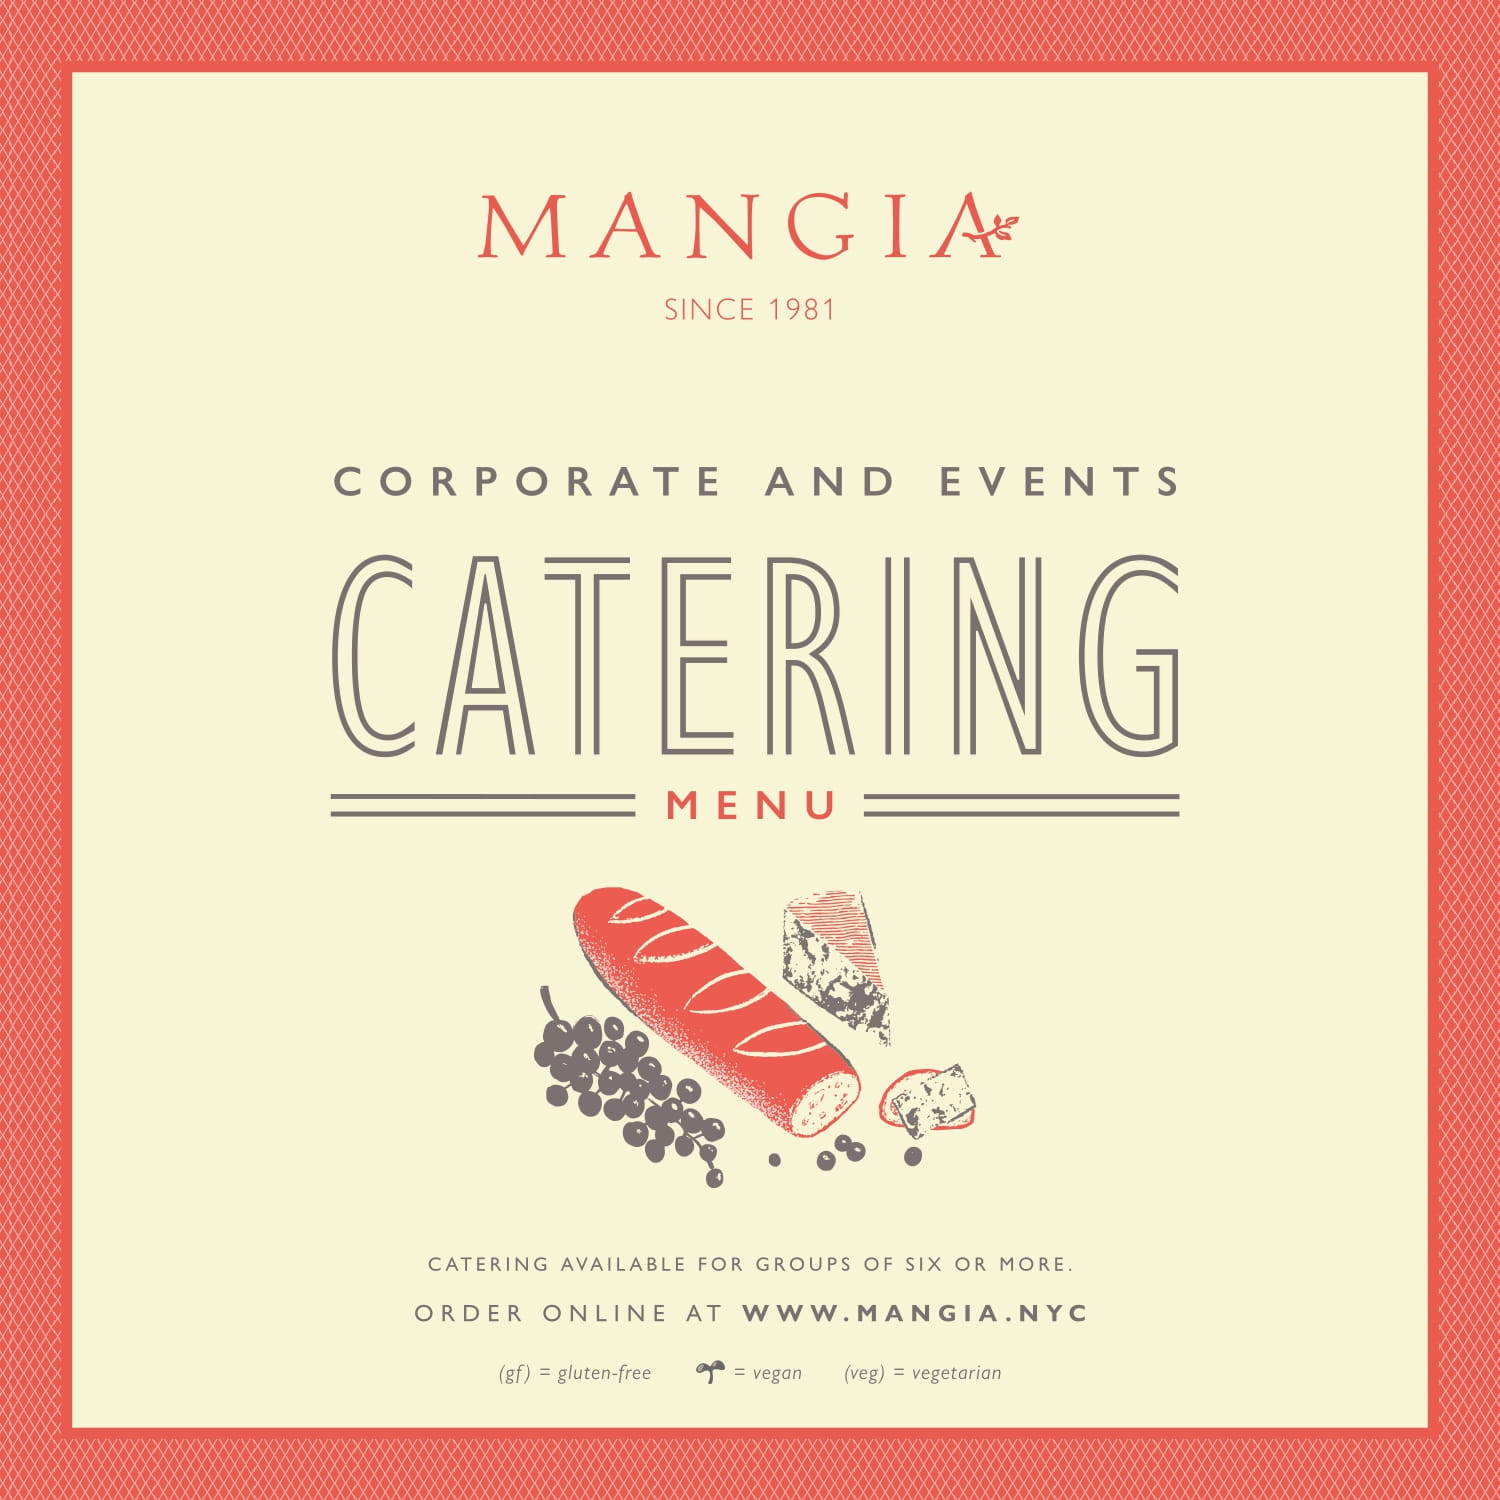 How To Choose The Right Business Lunch Menu? - Mangia NYC